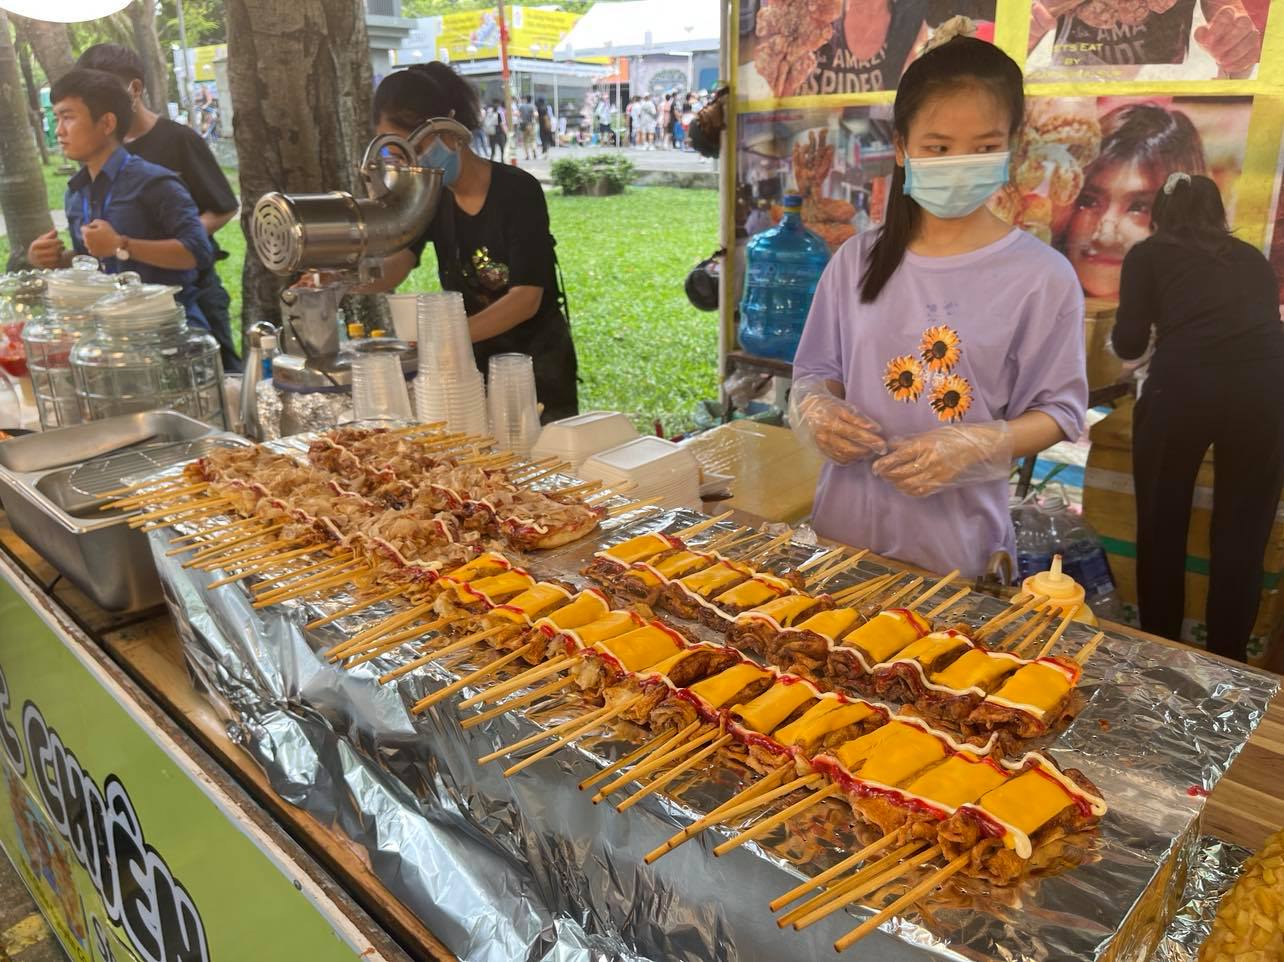 Grilled foods are seen at the Japan Vietnam Festival in Ho Chi Minh City on April 17, 2021. Photo: Dong Nguyen / Tuoi Tre News